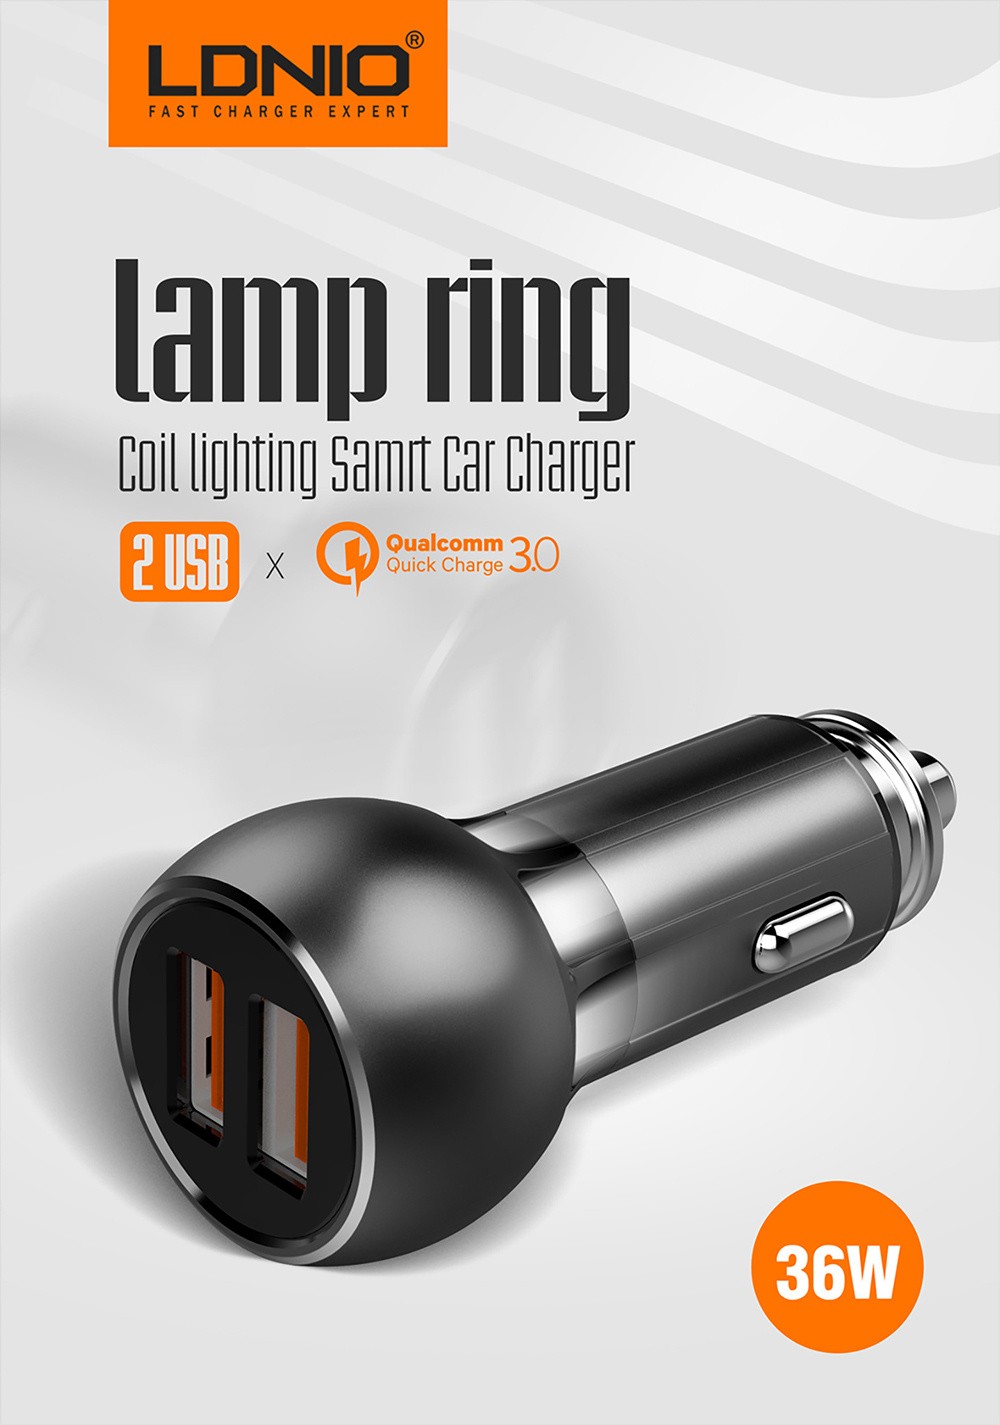 1 year Warranty LDNIO C503Q QC3.0 Fast Charge Dual USB Port Car Charger